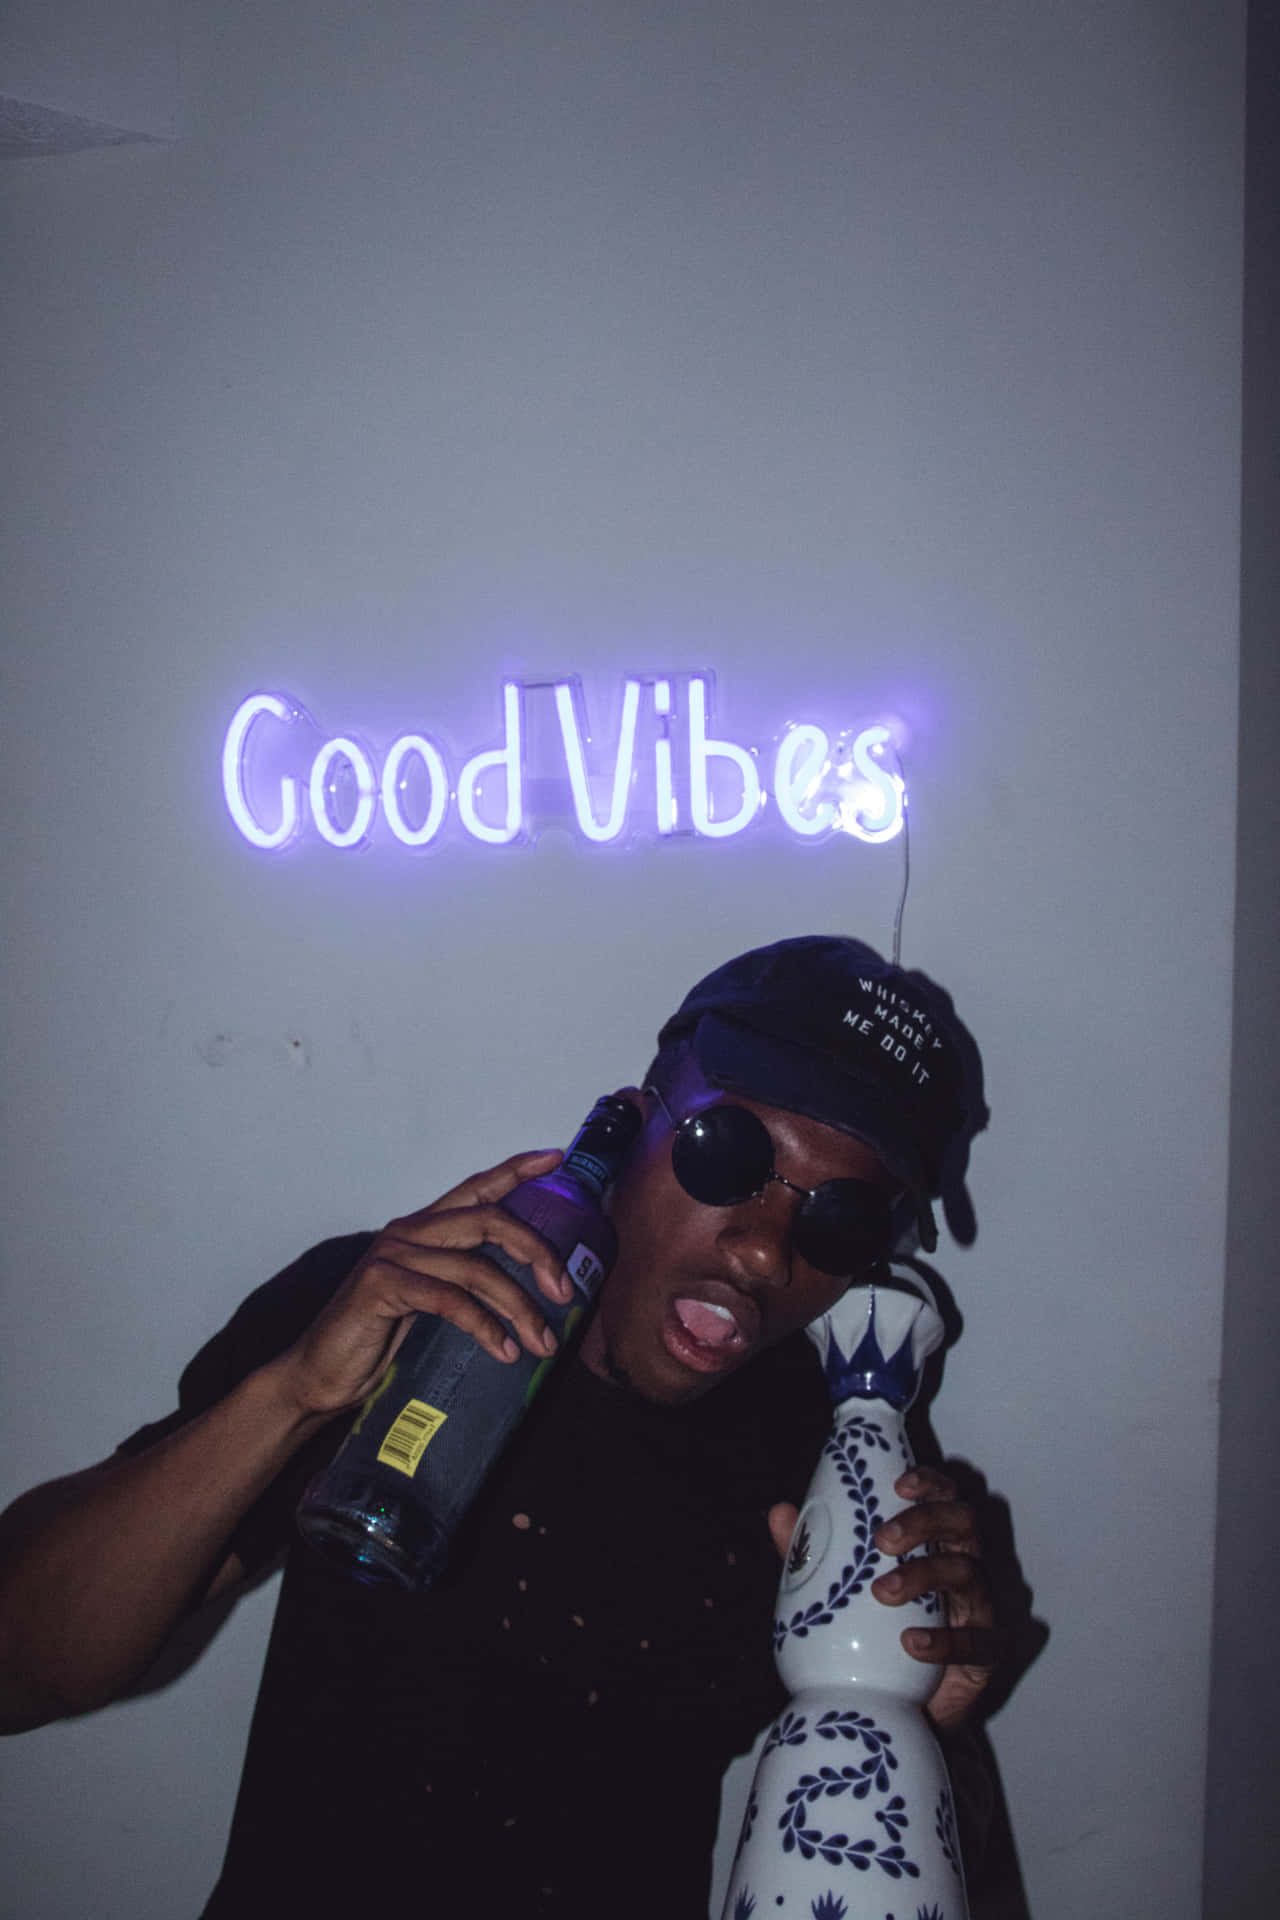 A Man Holding A Bottle Of Wine And A Sign That Says Good Vibes